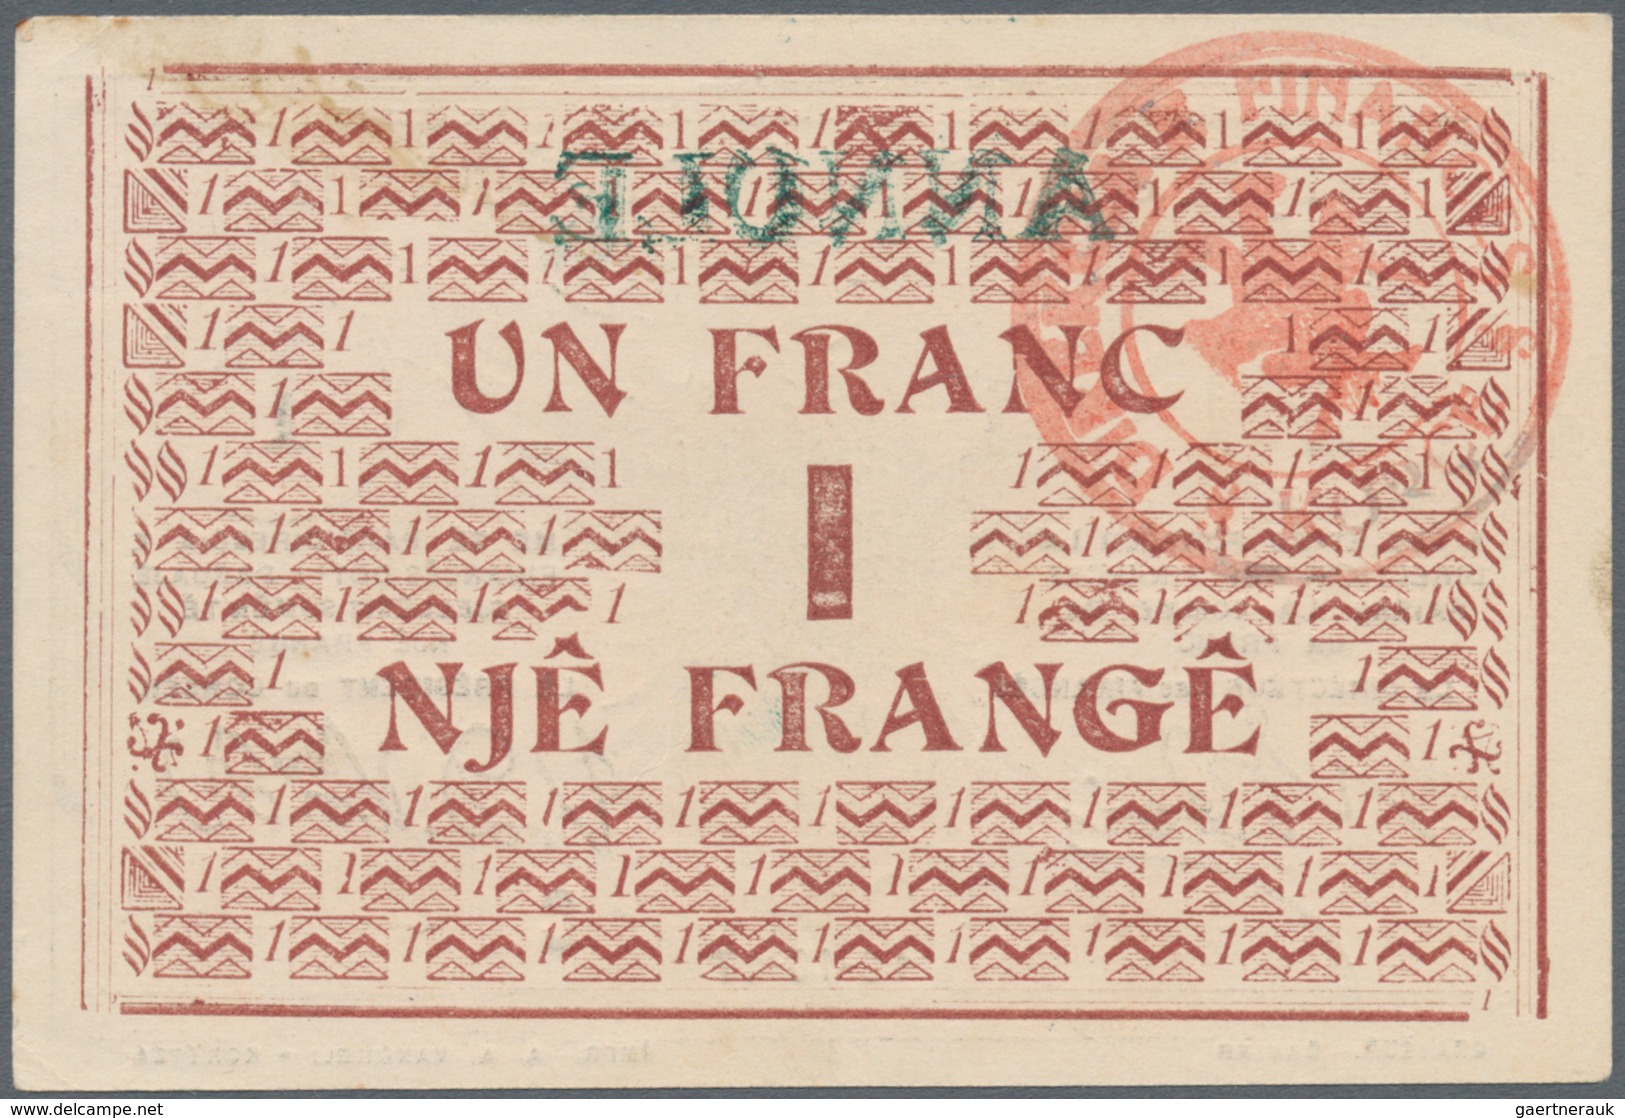 Albania / Albanien: 1 Frang 10.10.1917 P. S146 With Green Overprint Annule At Upper Border On Front, - Albania